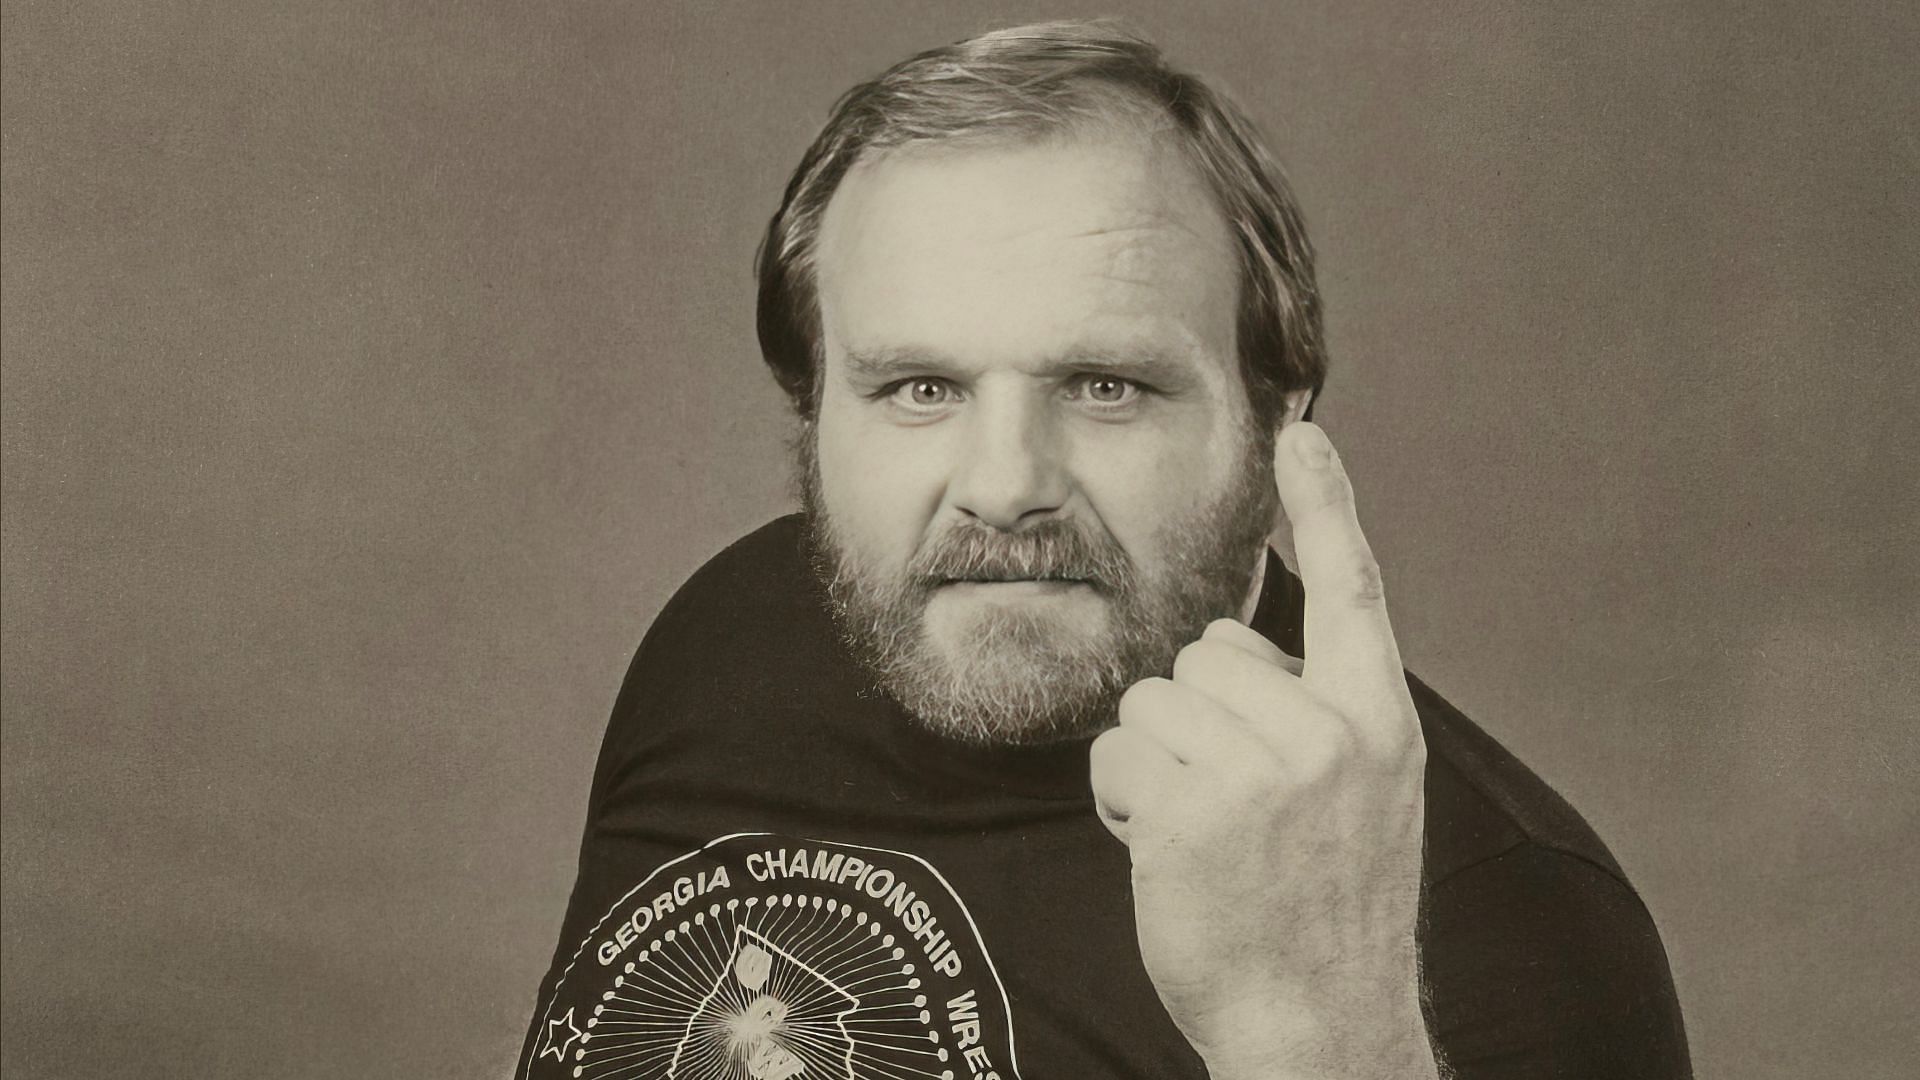 NWA and WCW Hall of Famer Ole Anderson poses for official photoshoot